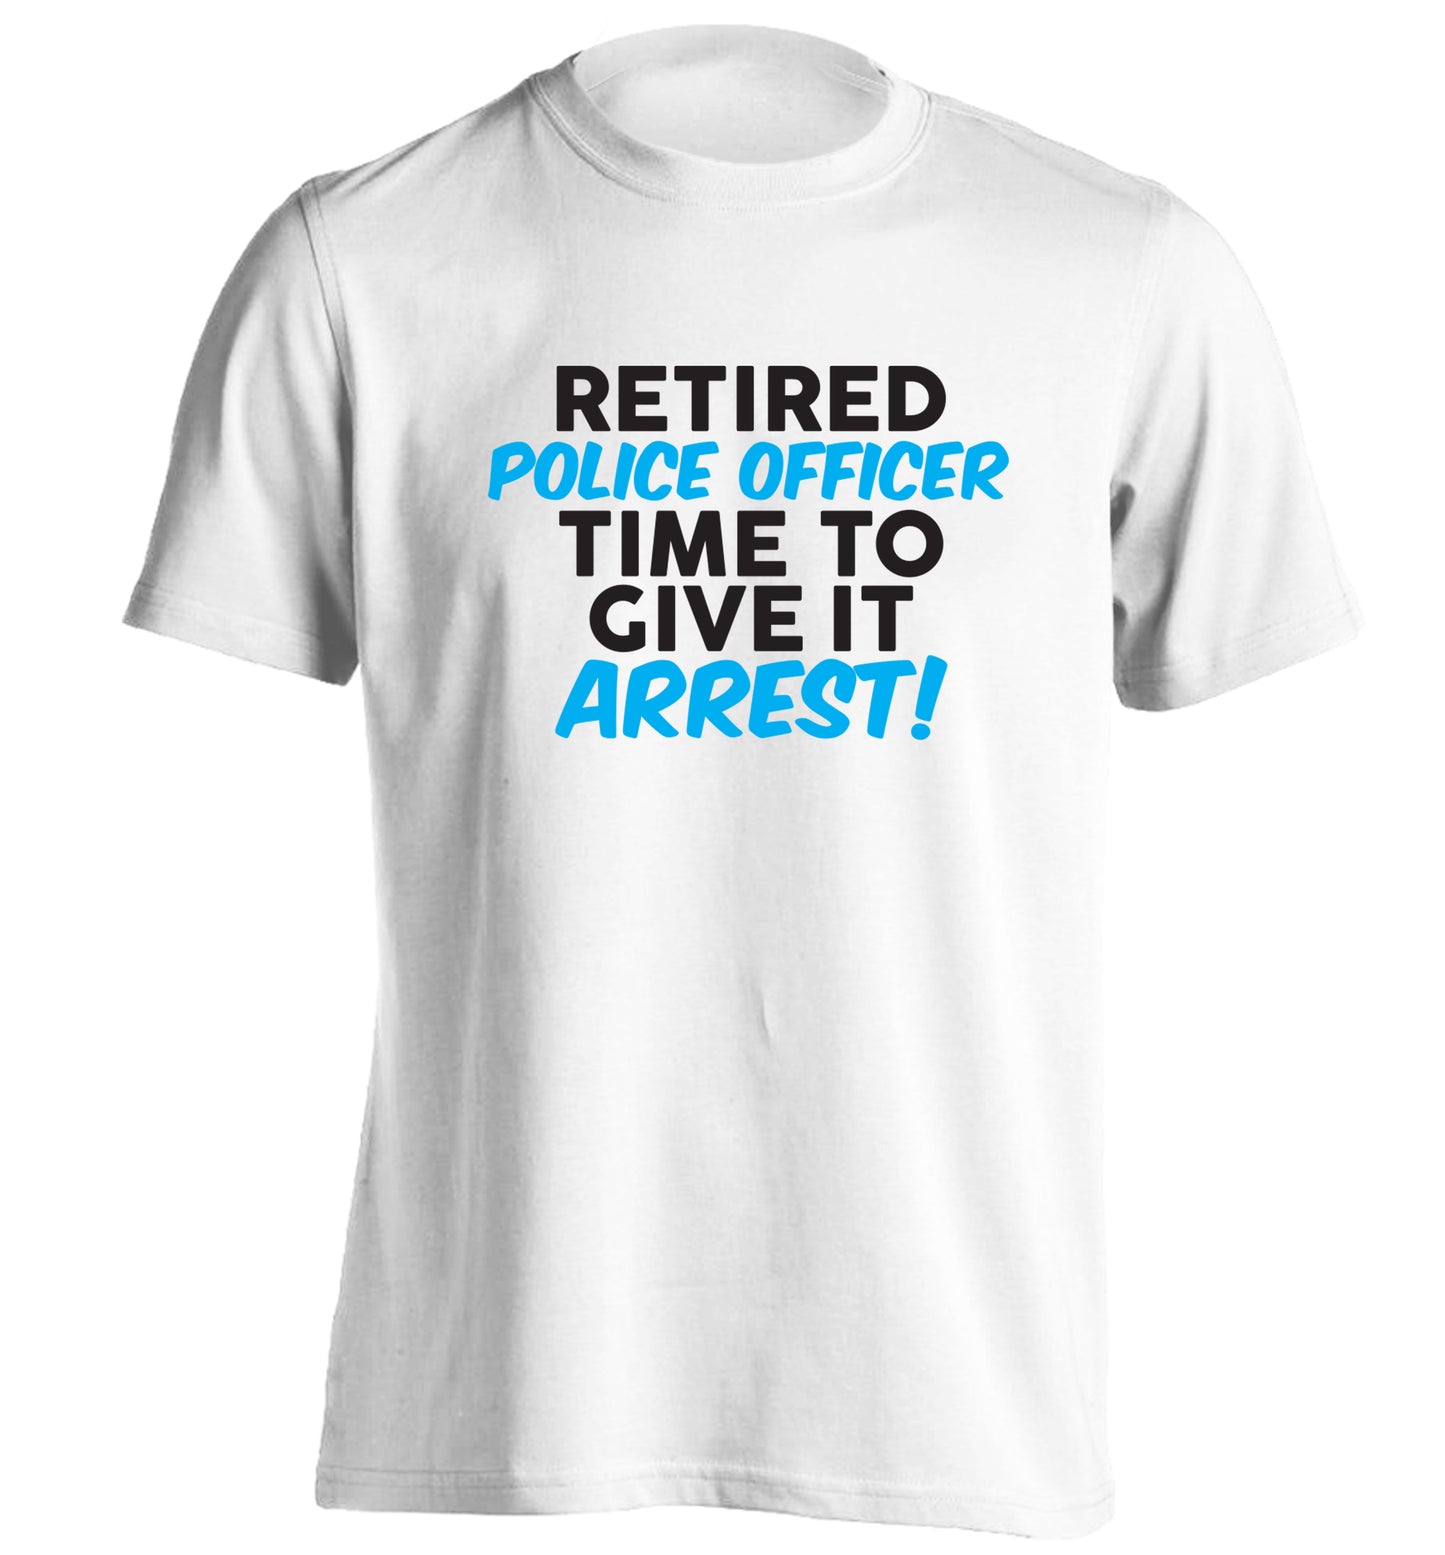 Retired police officer time to give it arrest adults unisex white Tshirt 2XL